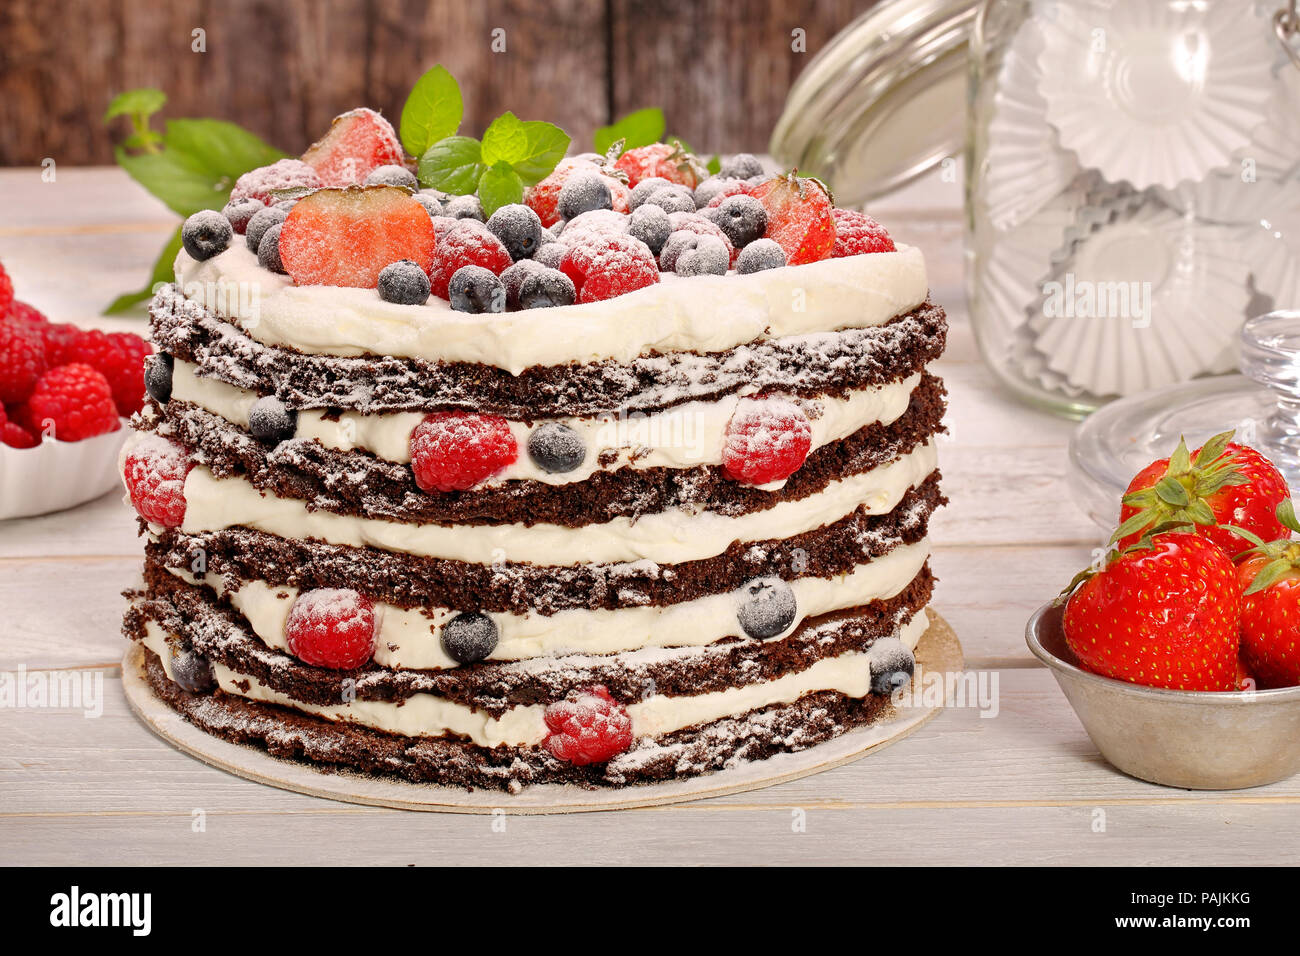 Chocolate cake with white cream and fresh fruits on wooden background Stock Photo